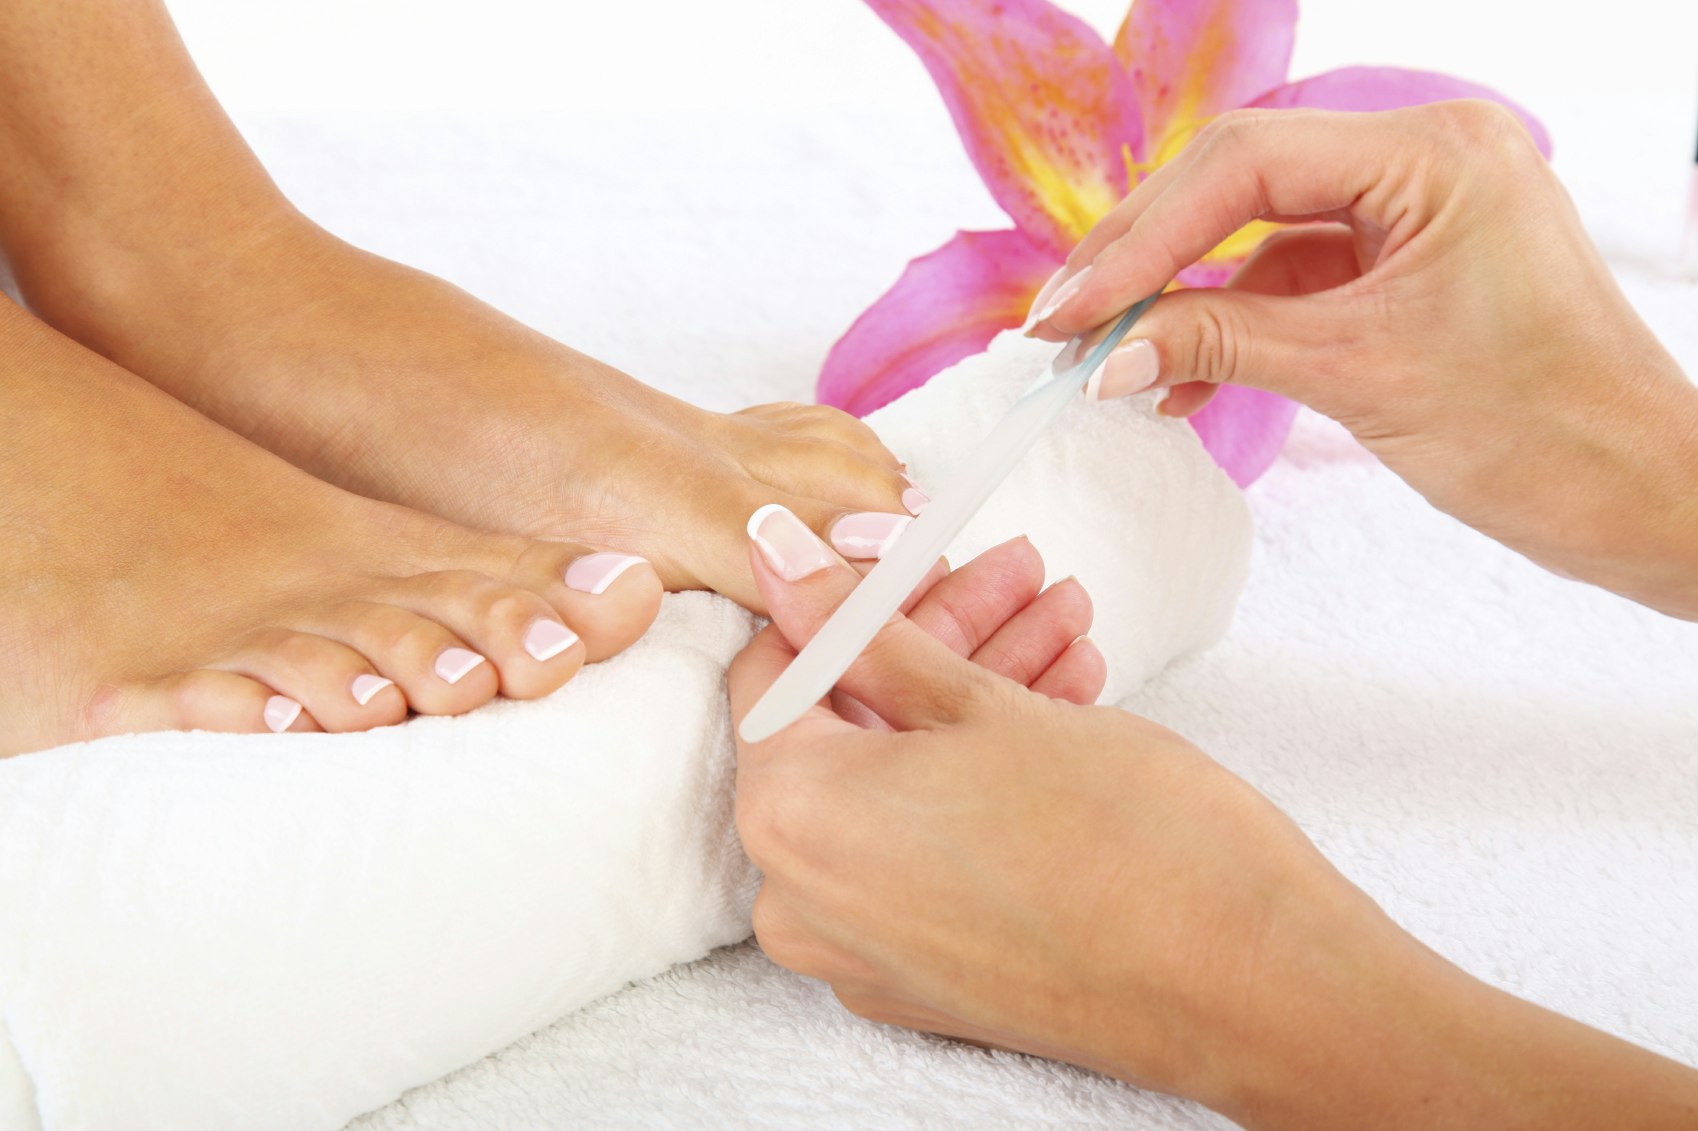 How Much Does a Manicure and Pedicure Cost? - wide 9